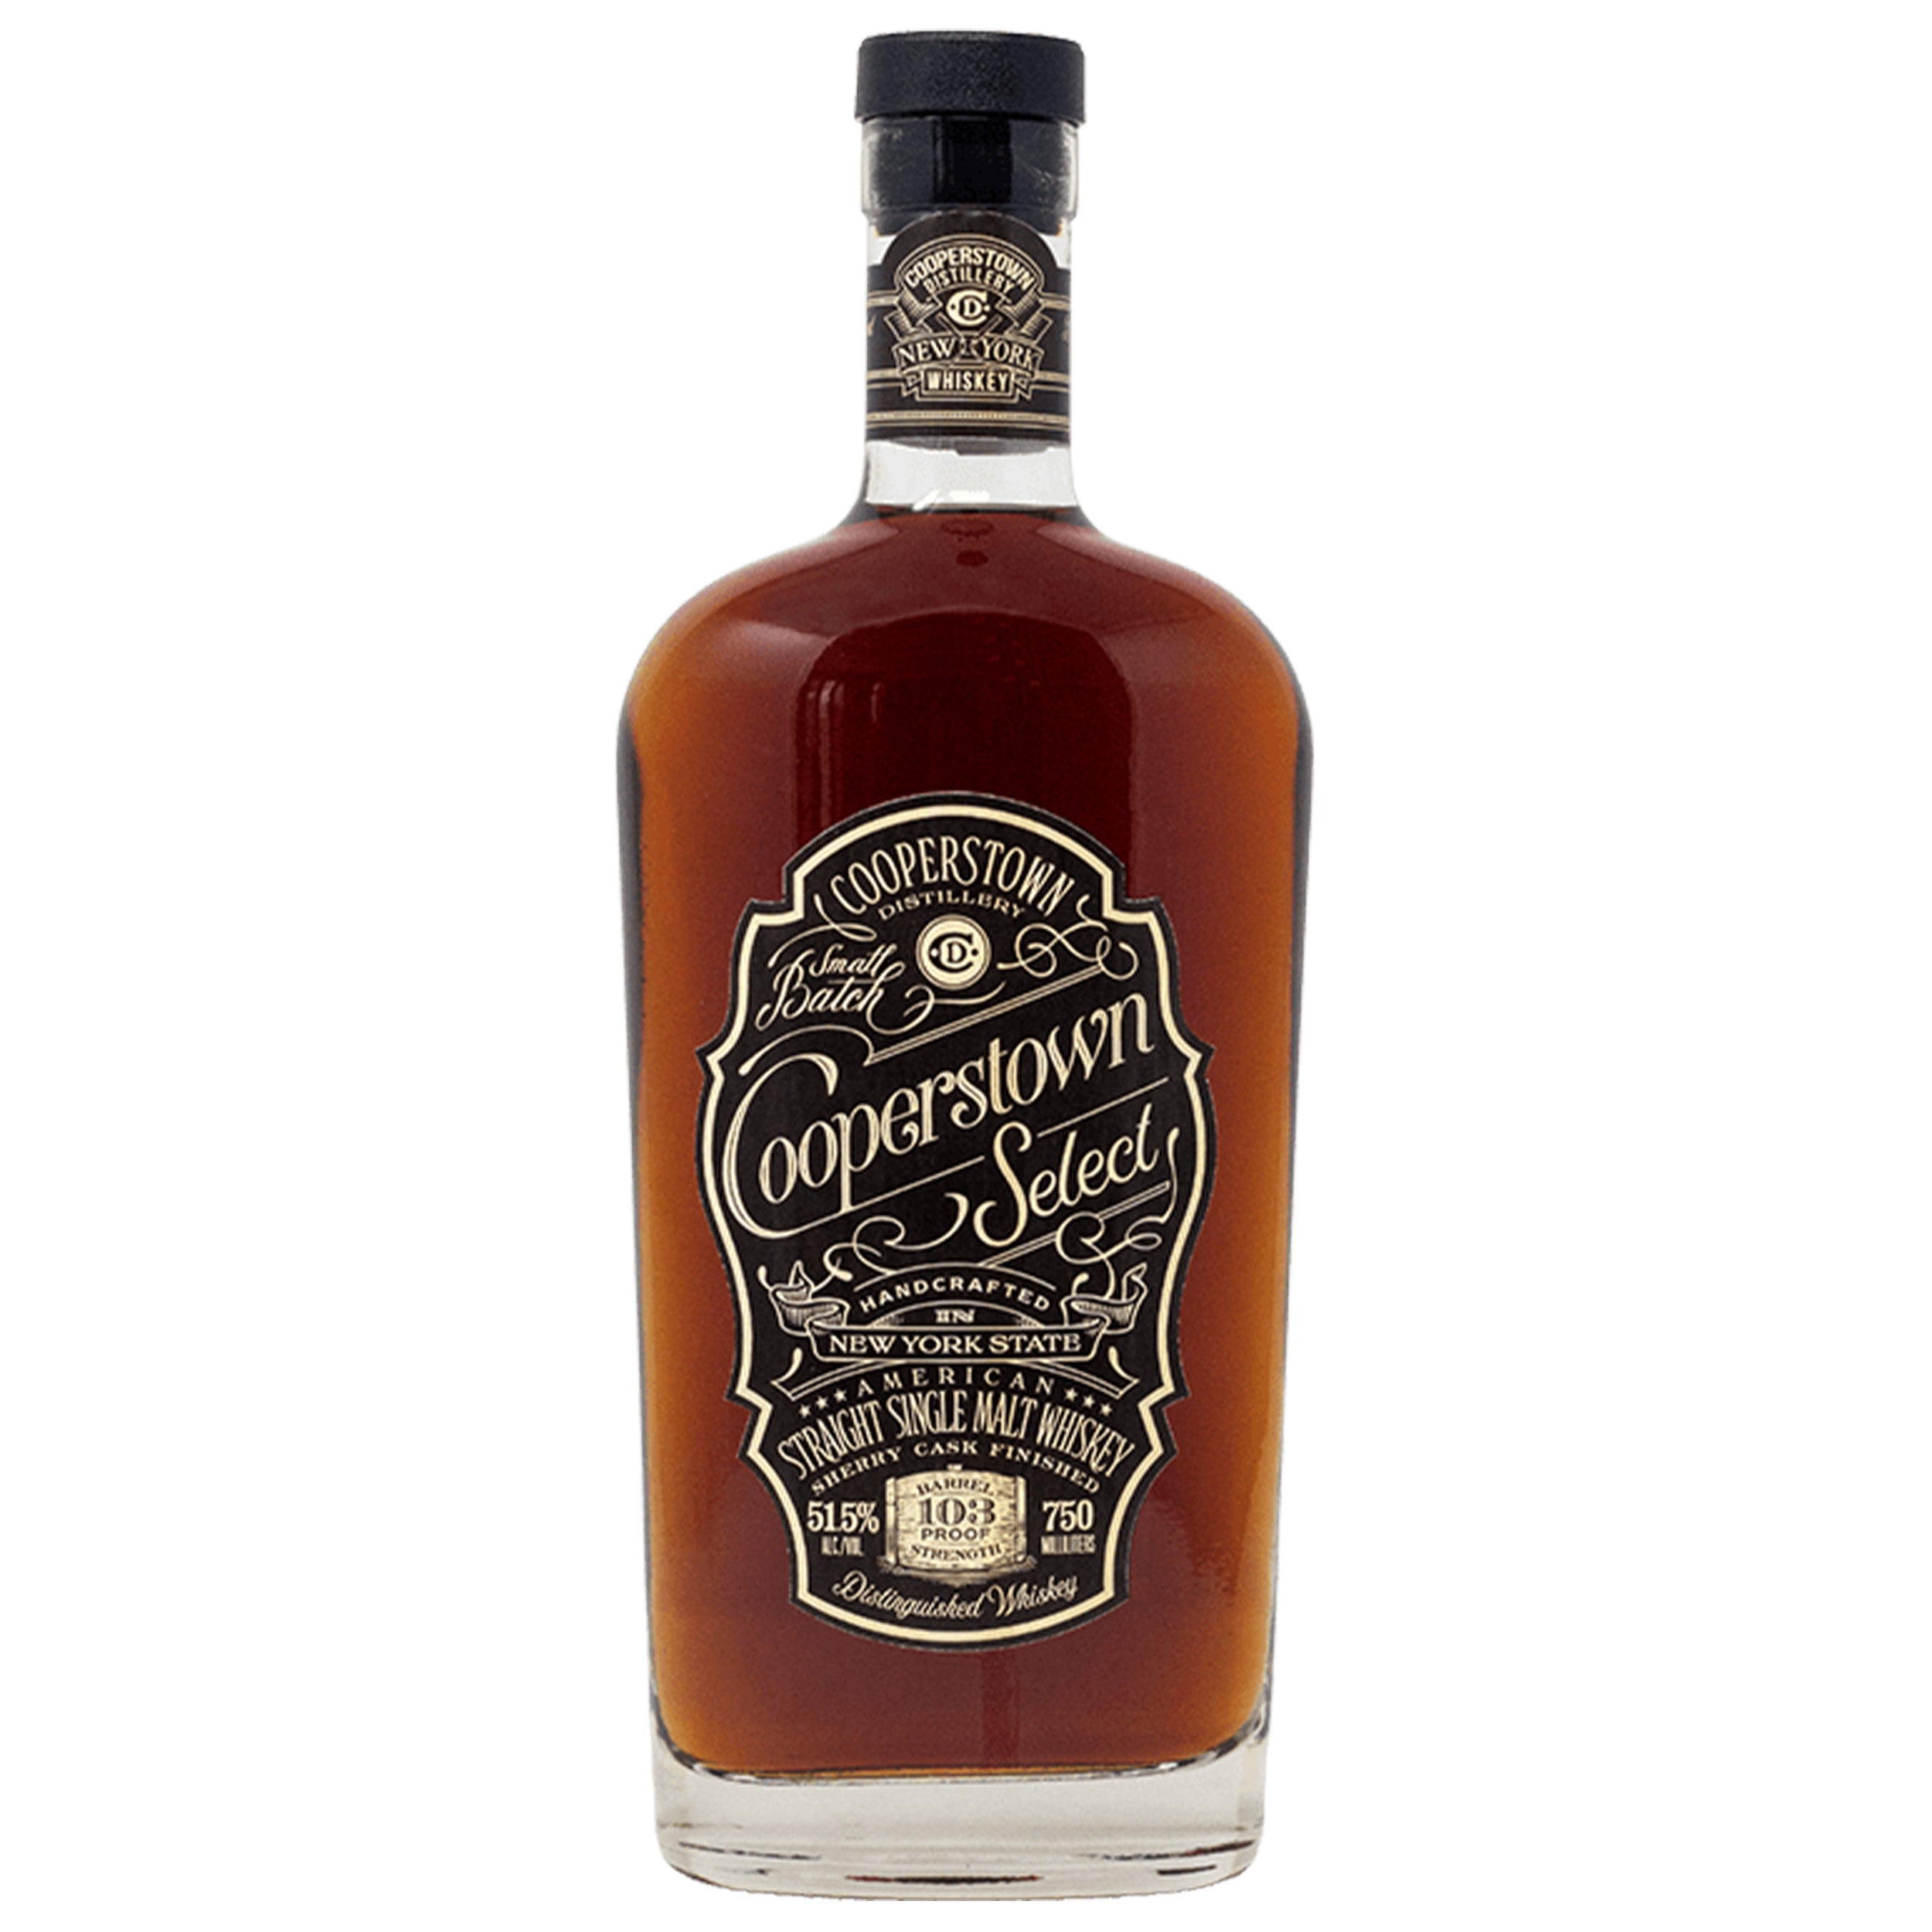 Cooperstown Select Straight Single Malt Whiskey